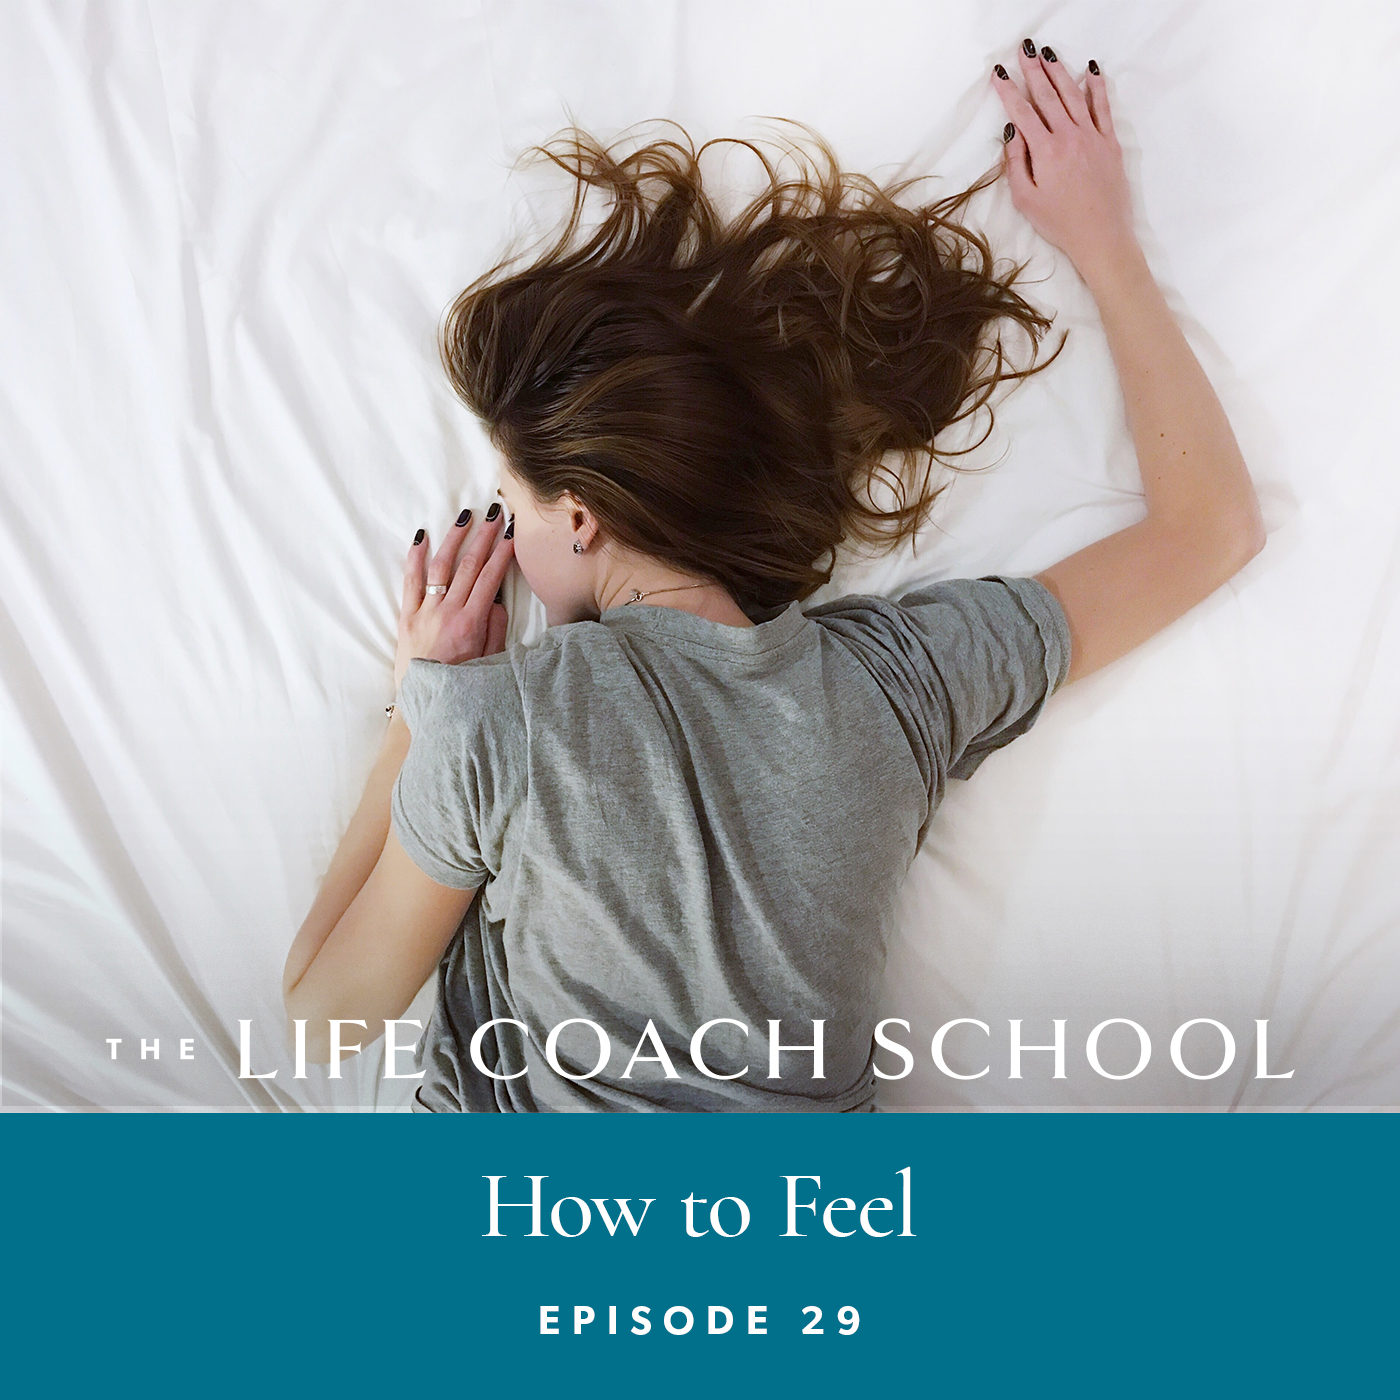 The Life Coach School Podcast with Brooke Castillo | Episode 29 | How to Feel